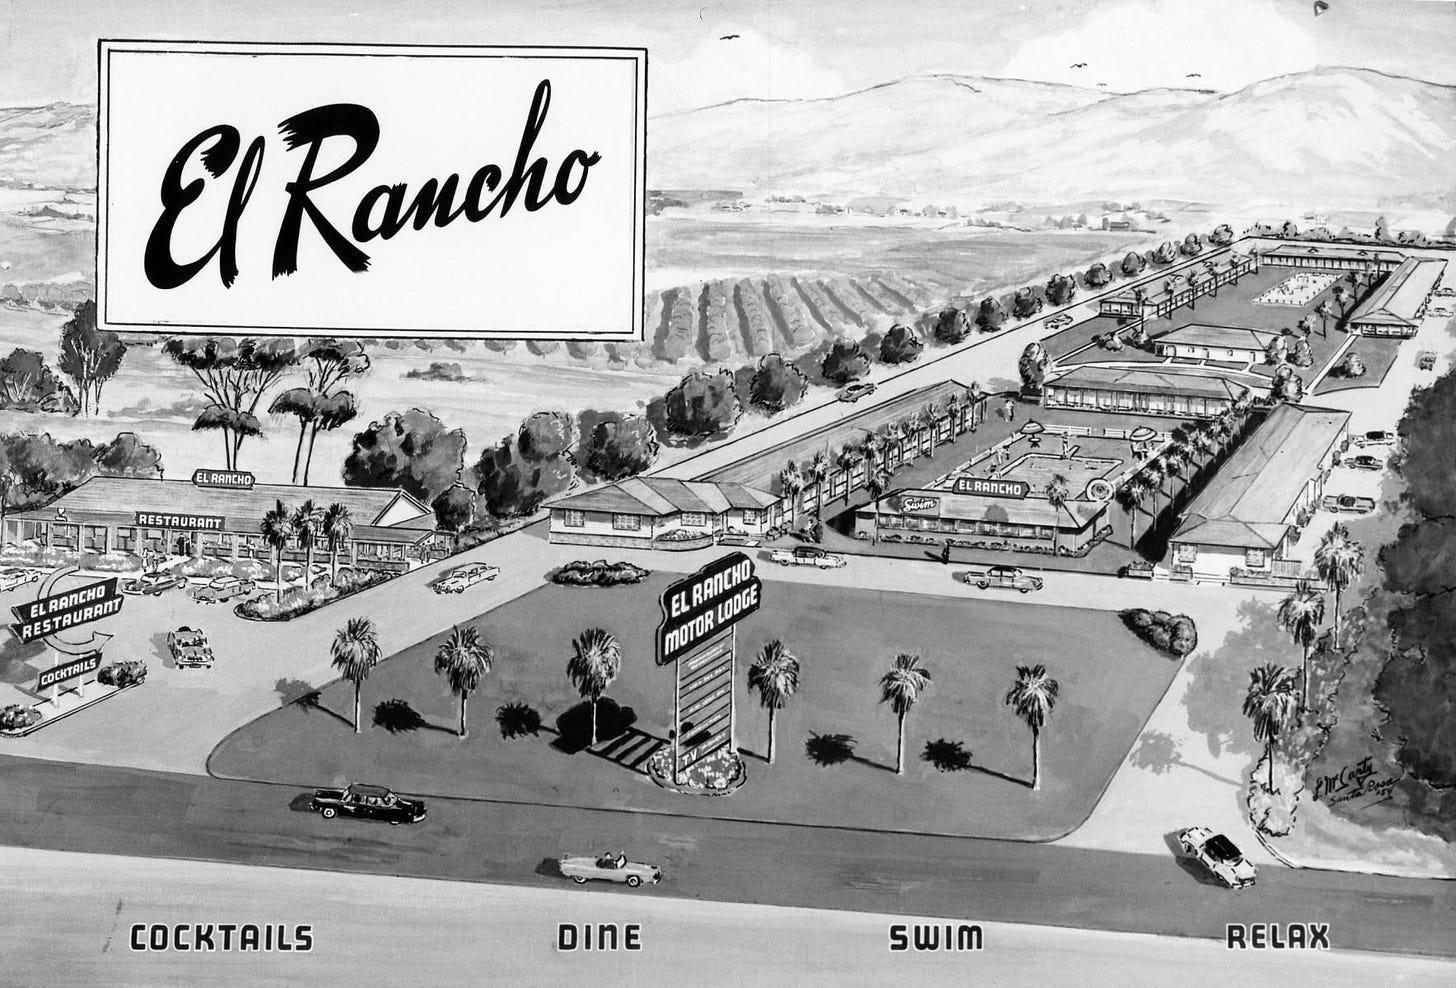 Photos: El Rancho Tropicana was the spot for rallies, conventions and  sports training